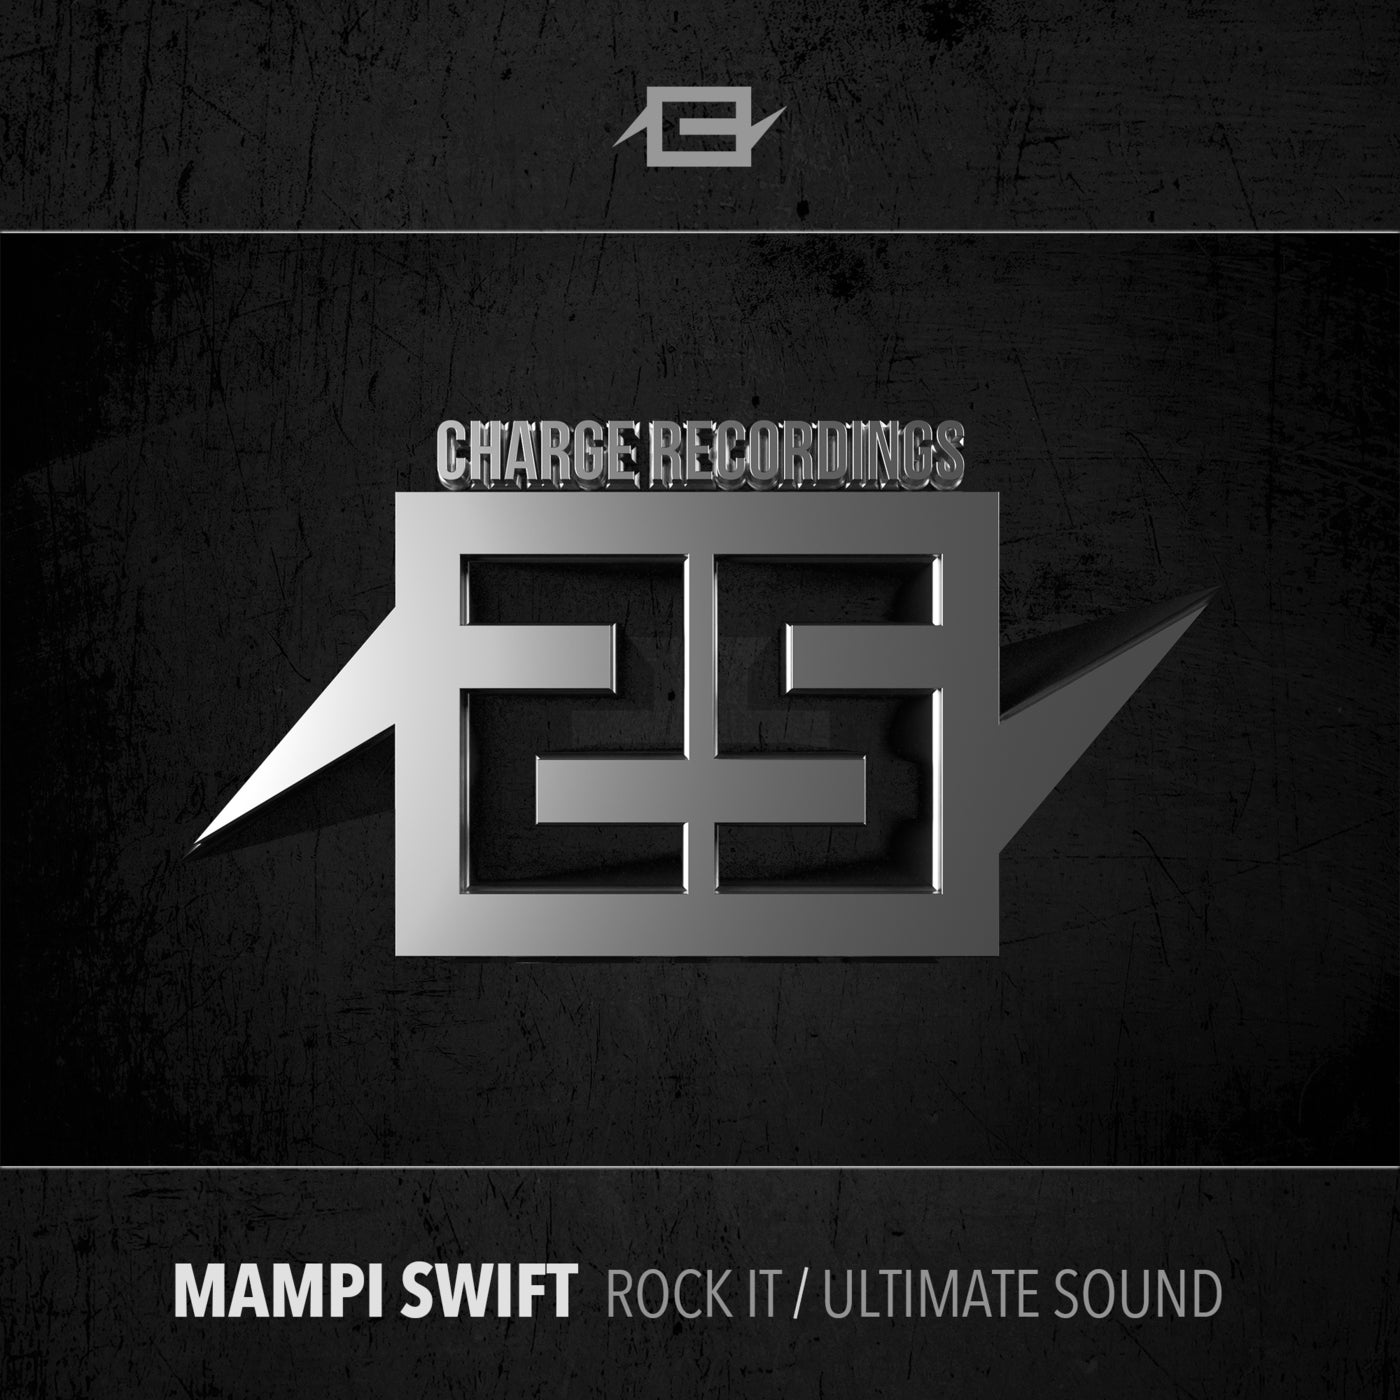 25 years of Charge Rock It / Ultimate Sound